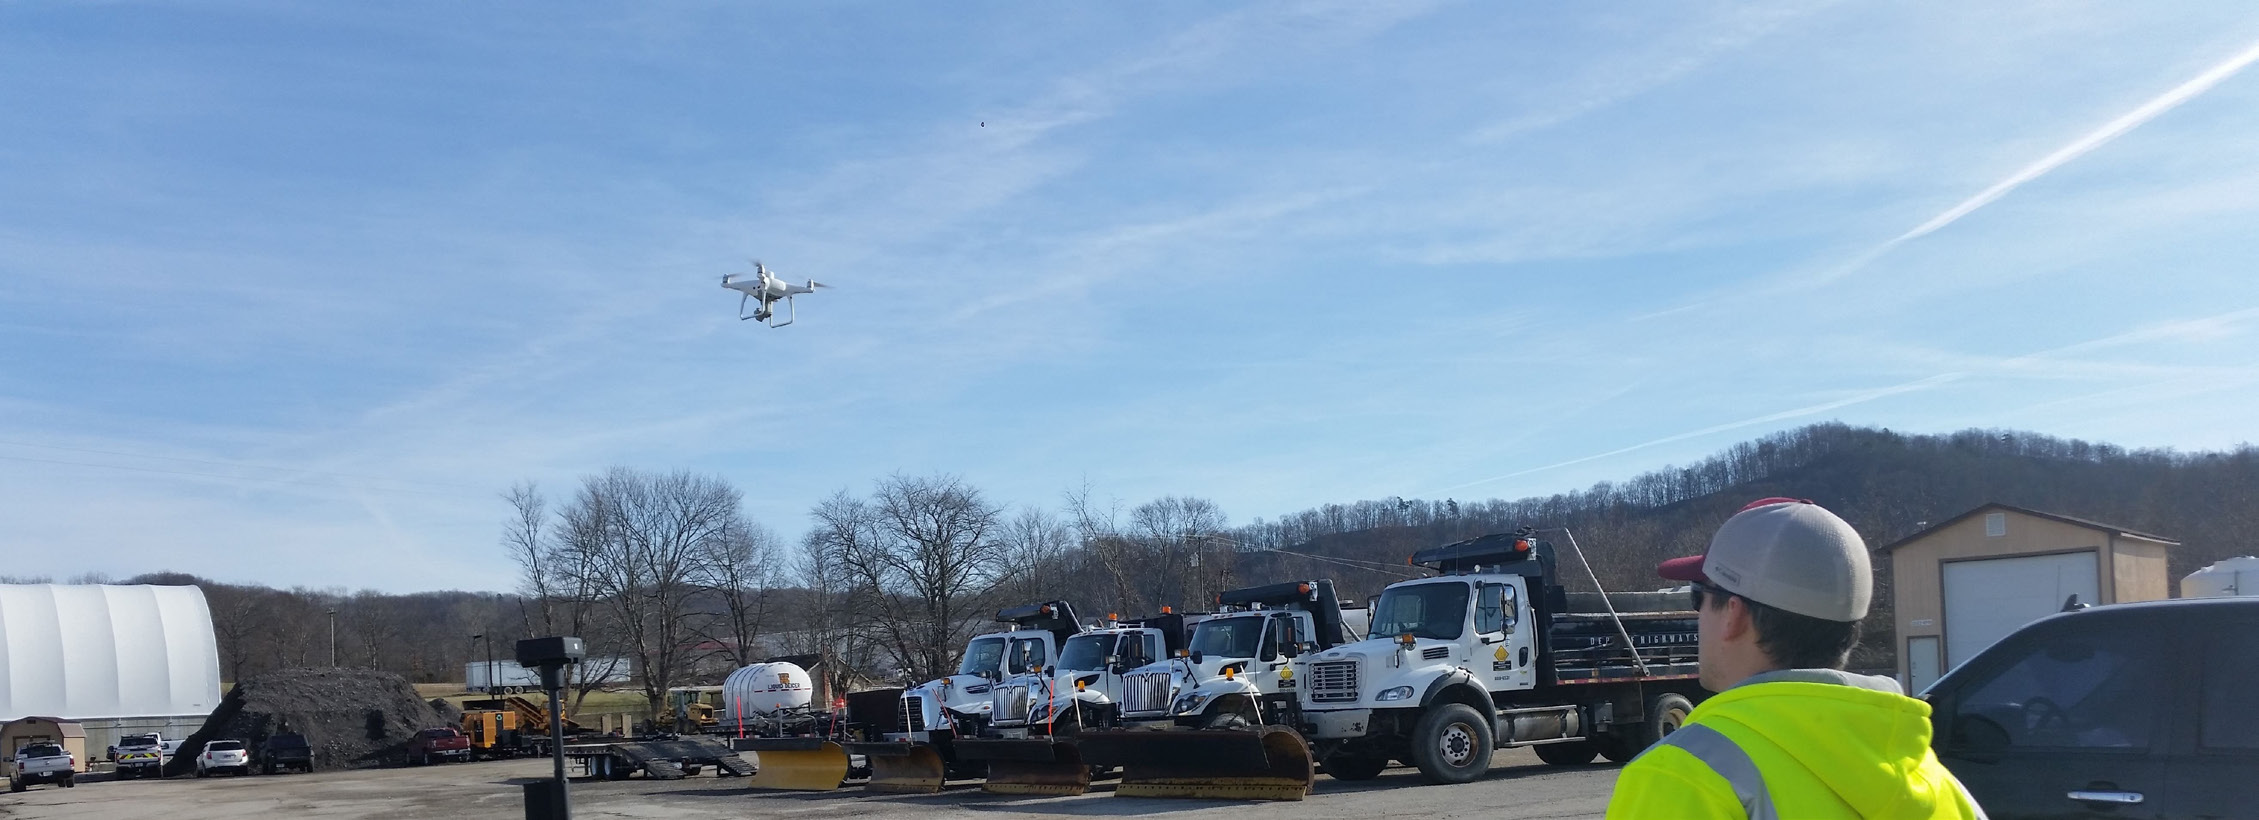 A drone in flight over a maintenance facility